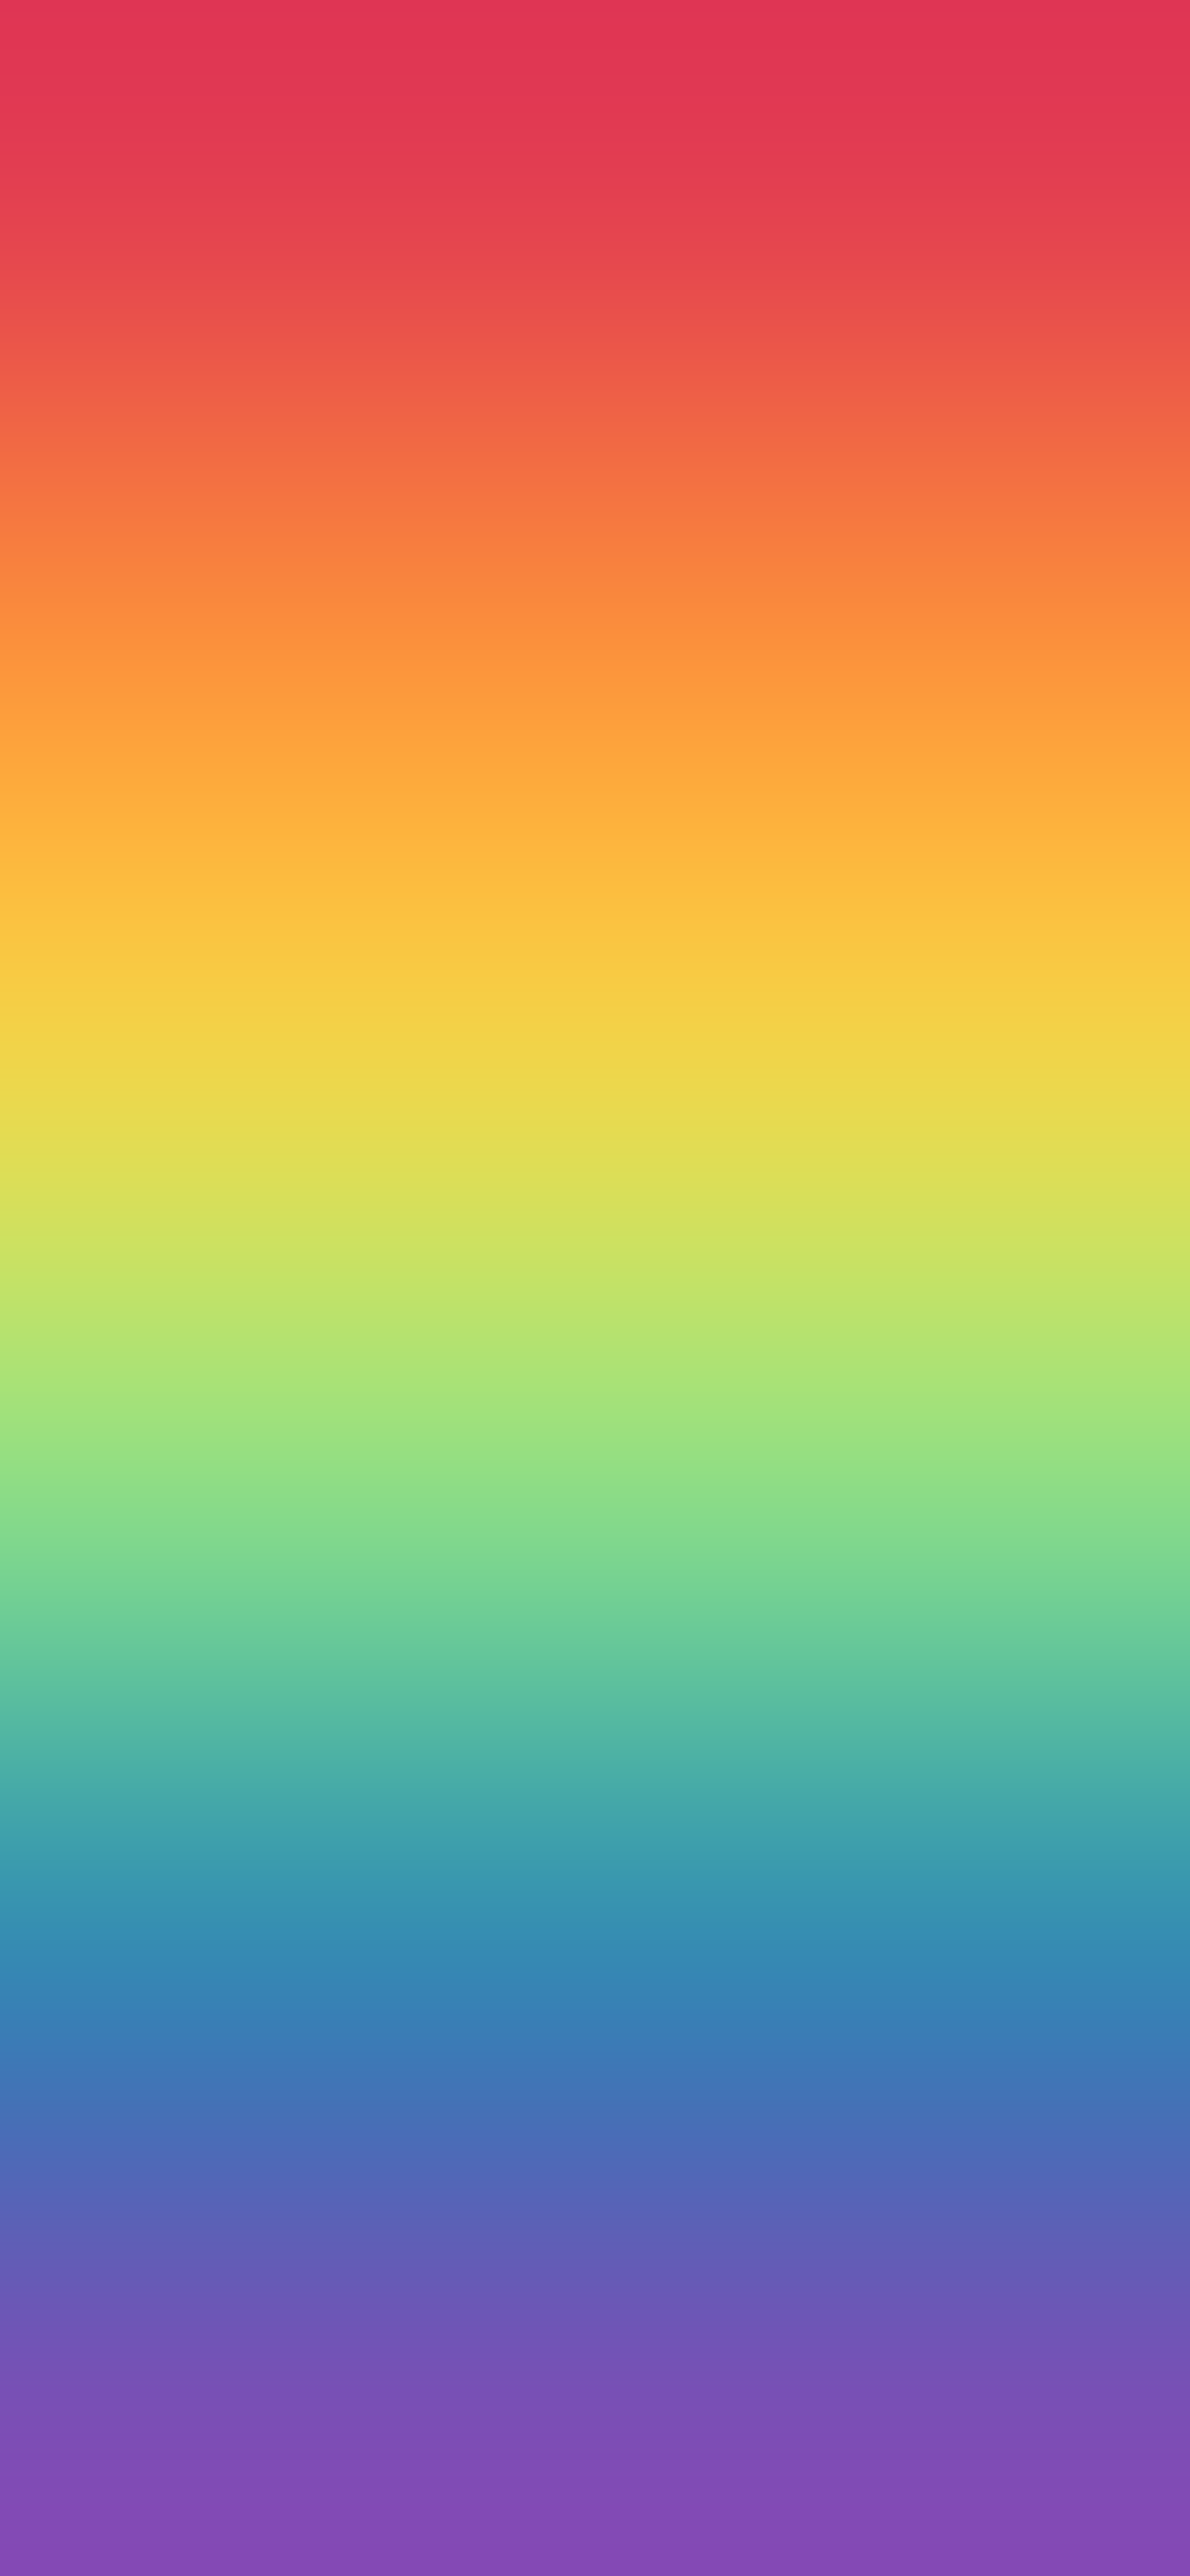 Apple Pride 2021 Black  Wallpapers Central  Apple logo wallpaper  Abstract iphone wallpaper Apple watch faces